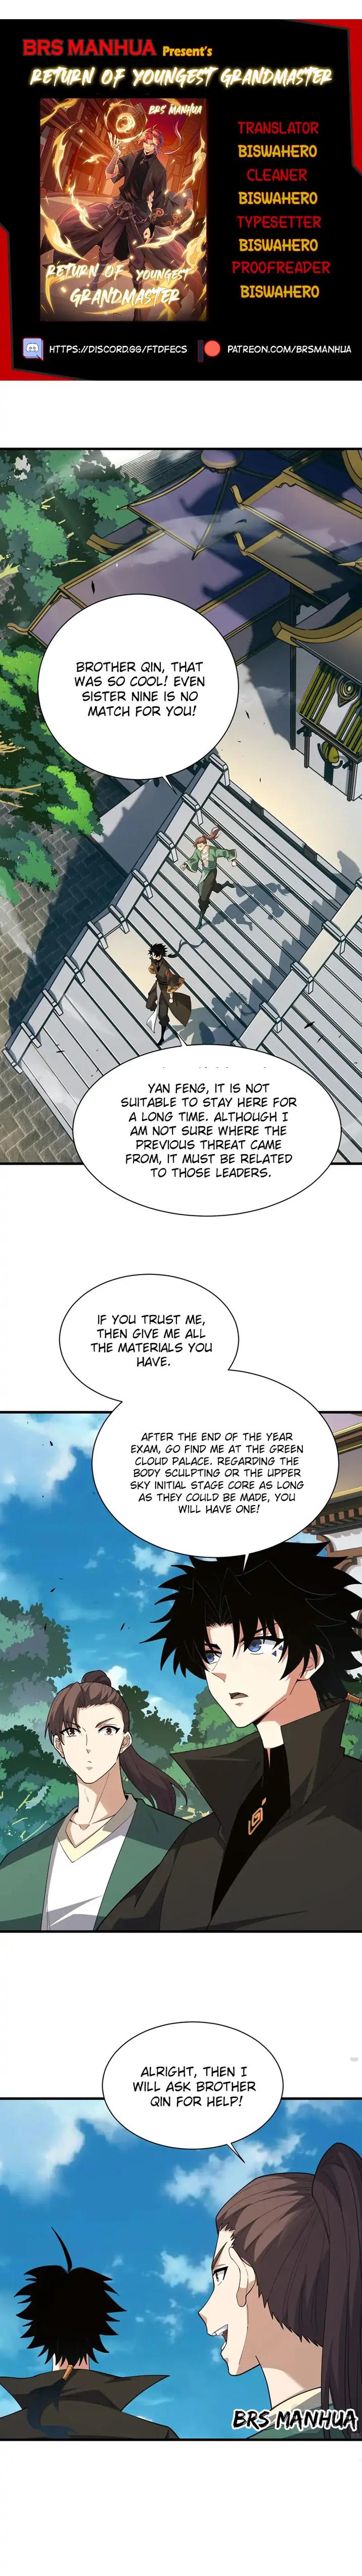 Fighting Again For A Lifetime (Return of the Youngest Grandmaster) Chapter 53-eng-li - Page 0